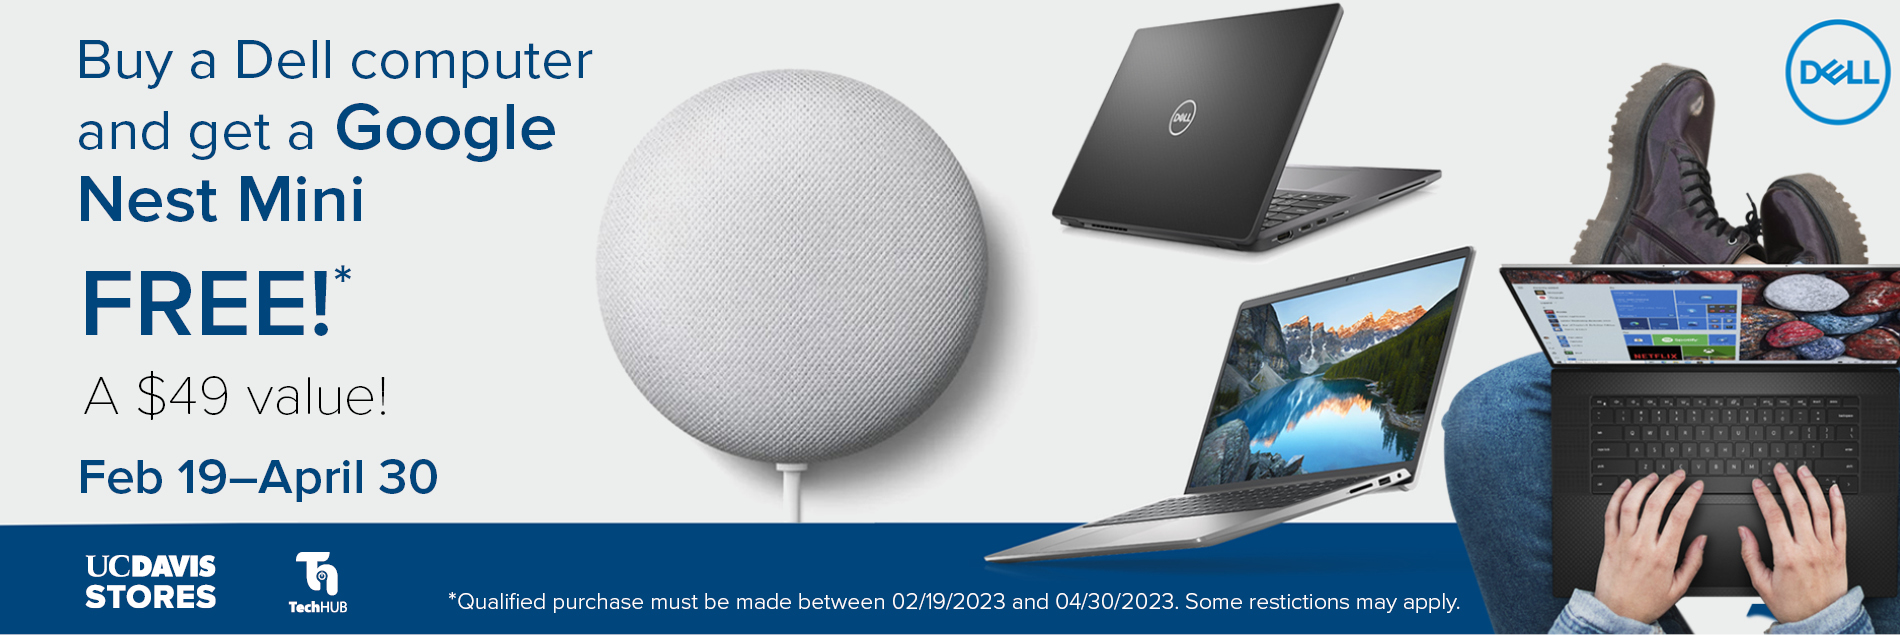 Buy a Dell computer and get a Google Nest Mini free. A $49 value.